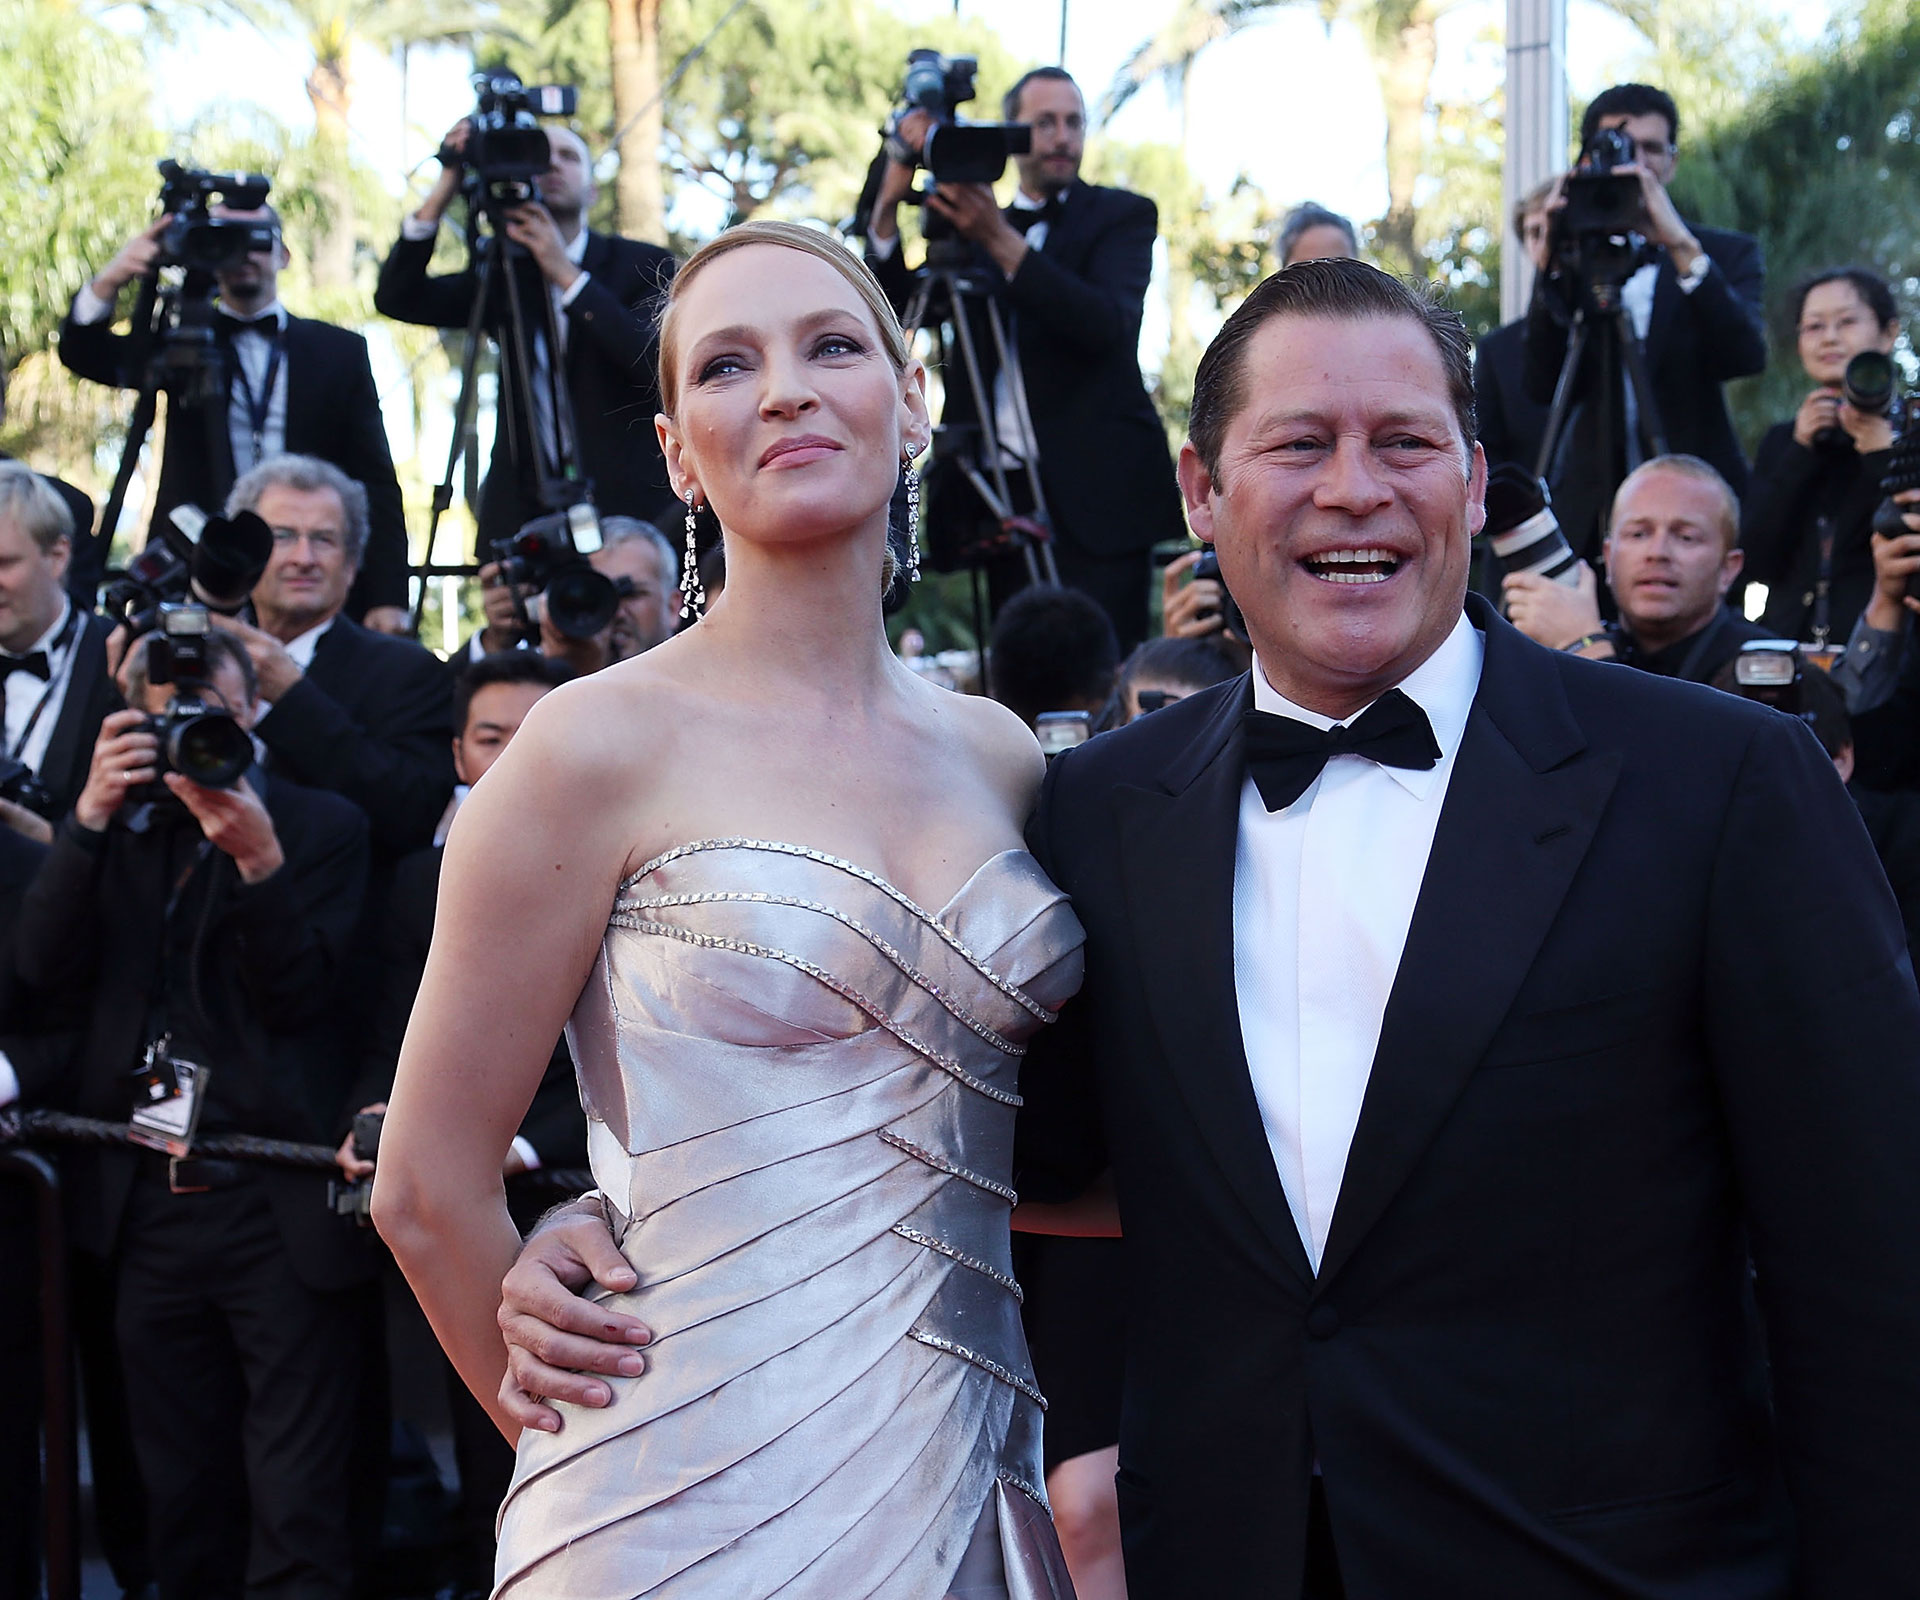 Uma Thurman won’t be required to answer questions about her drinking habits in bitter custody battle 